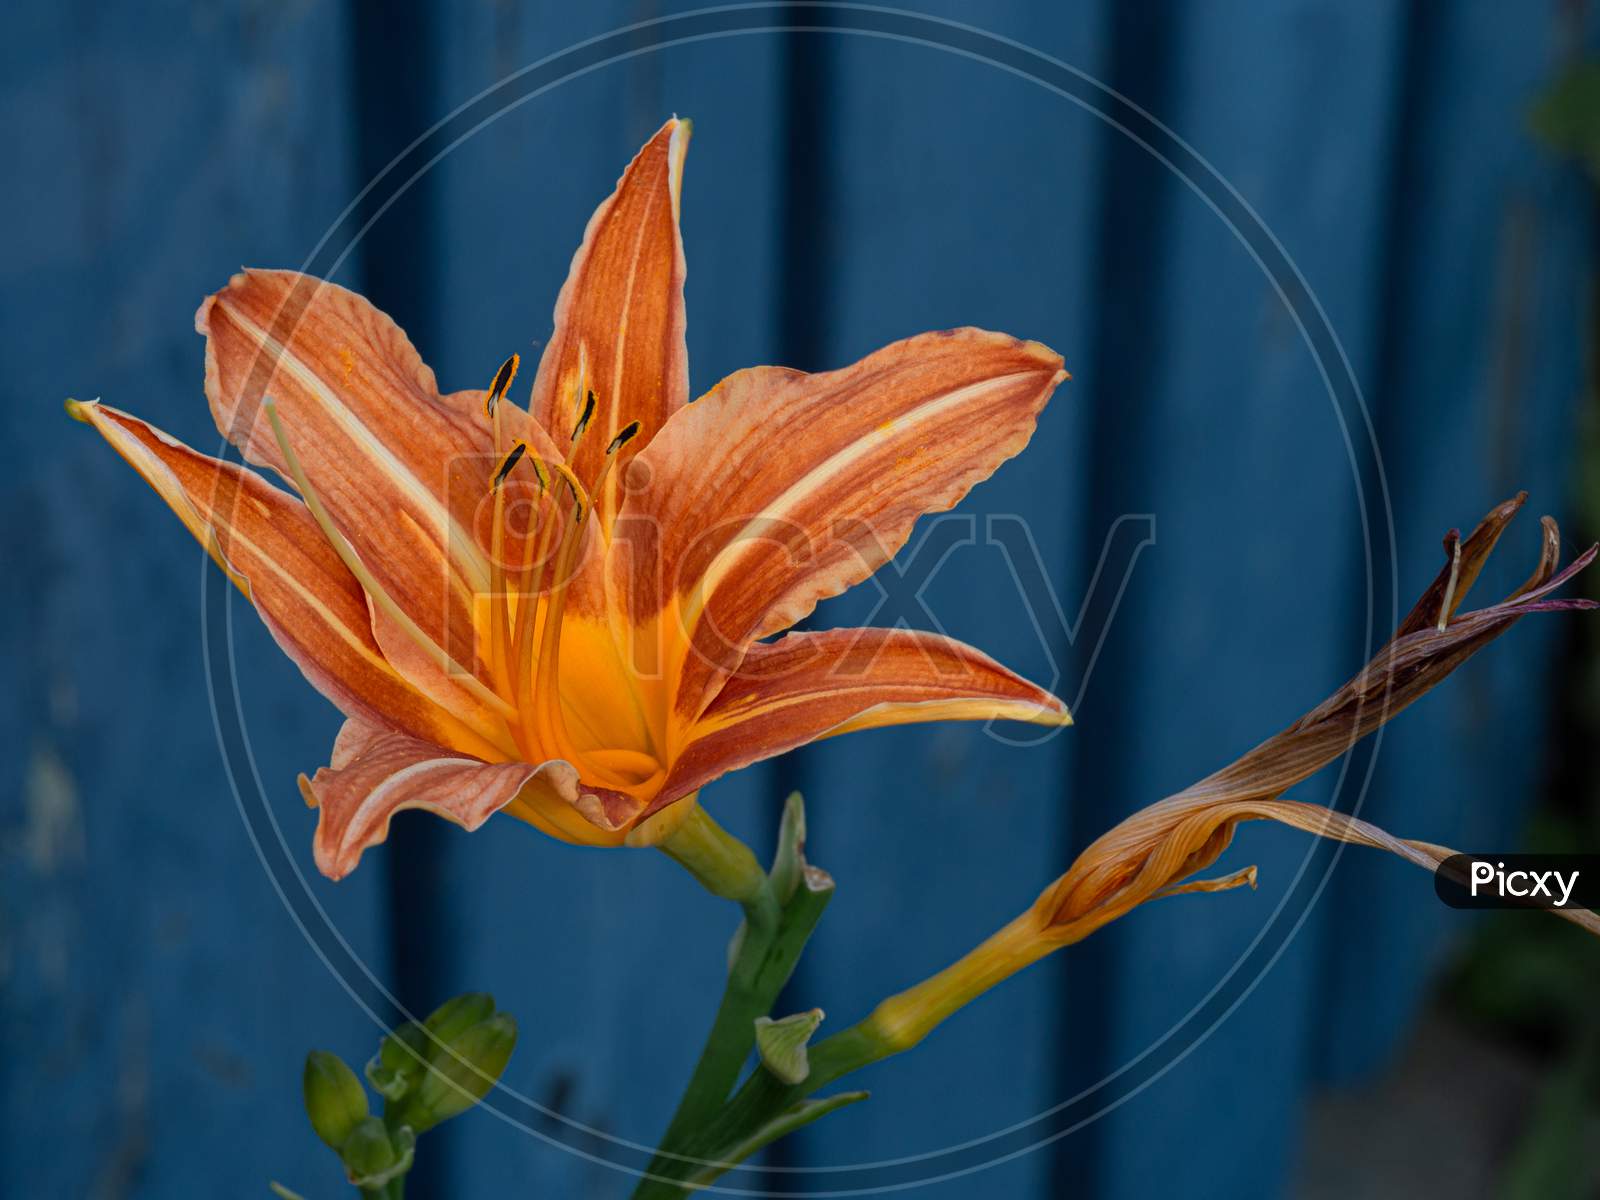 Close-Up Of Flower Head Of Orange Day-Lily Or Tiger Daylily.